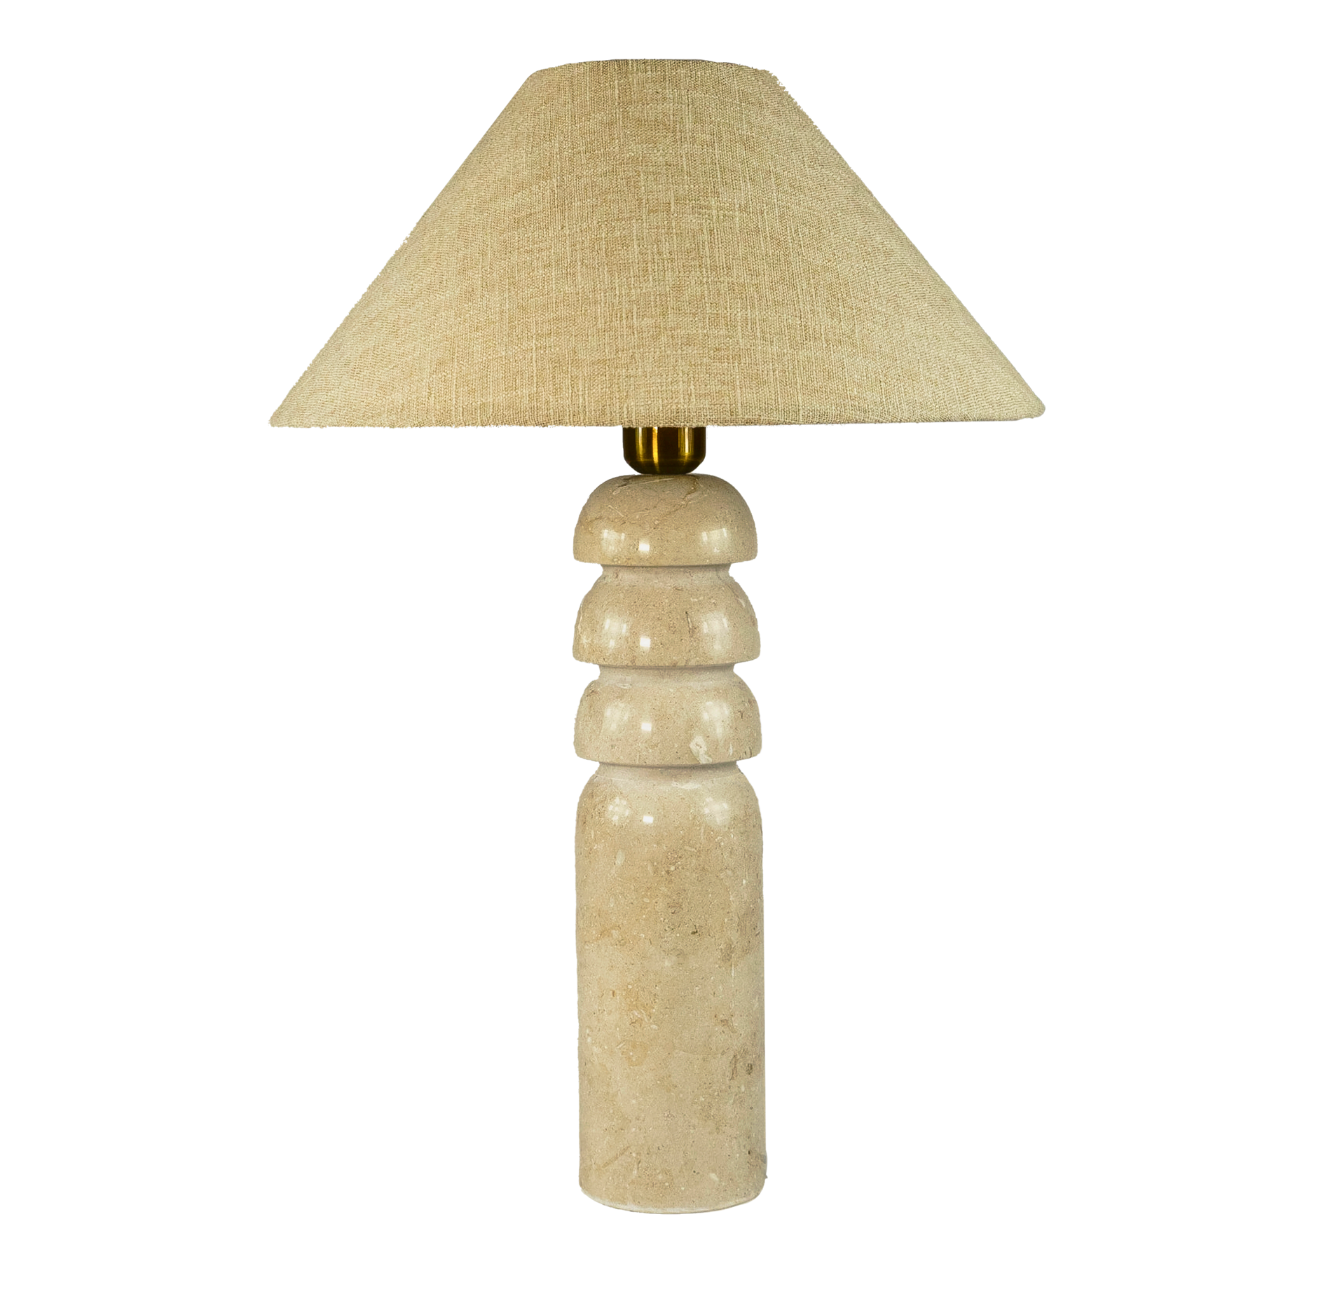 Cascade Marble Lamp with Fabric Shade